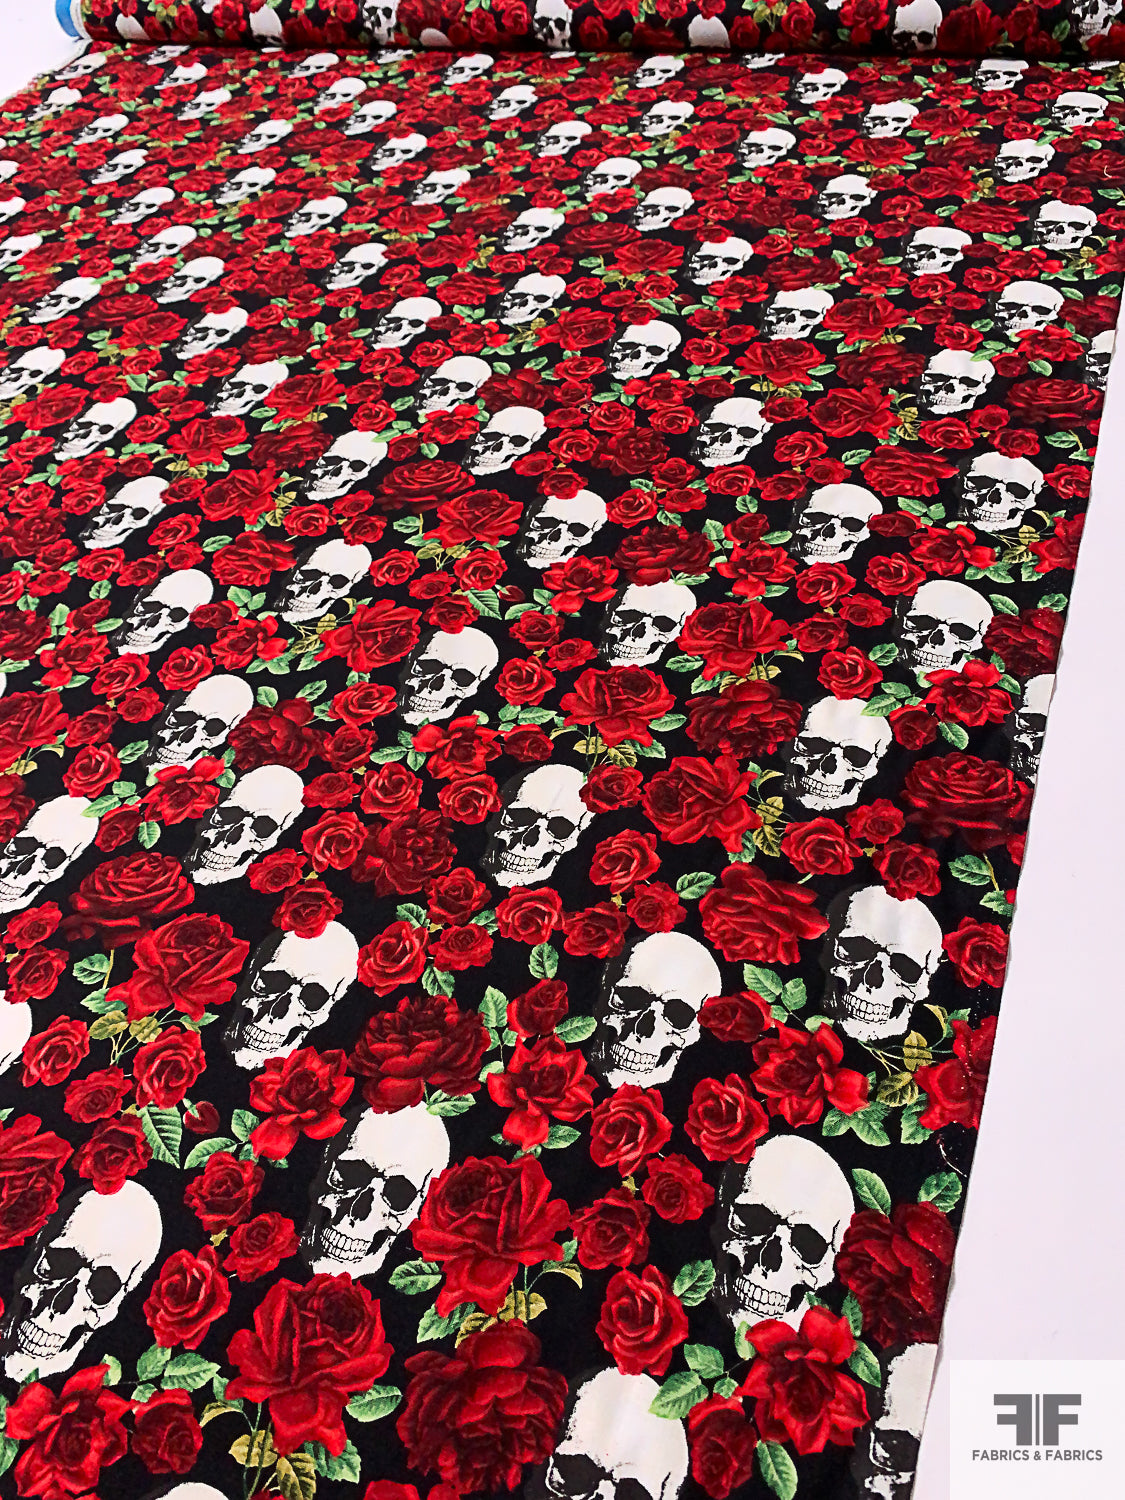 Skulls and Floral Printed Cotton Lawn - Red / Black / Green / White